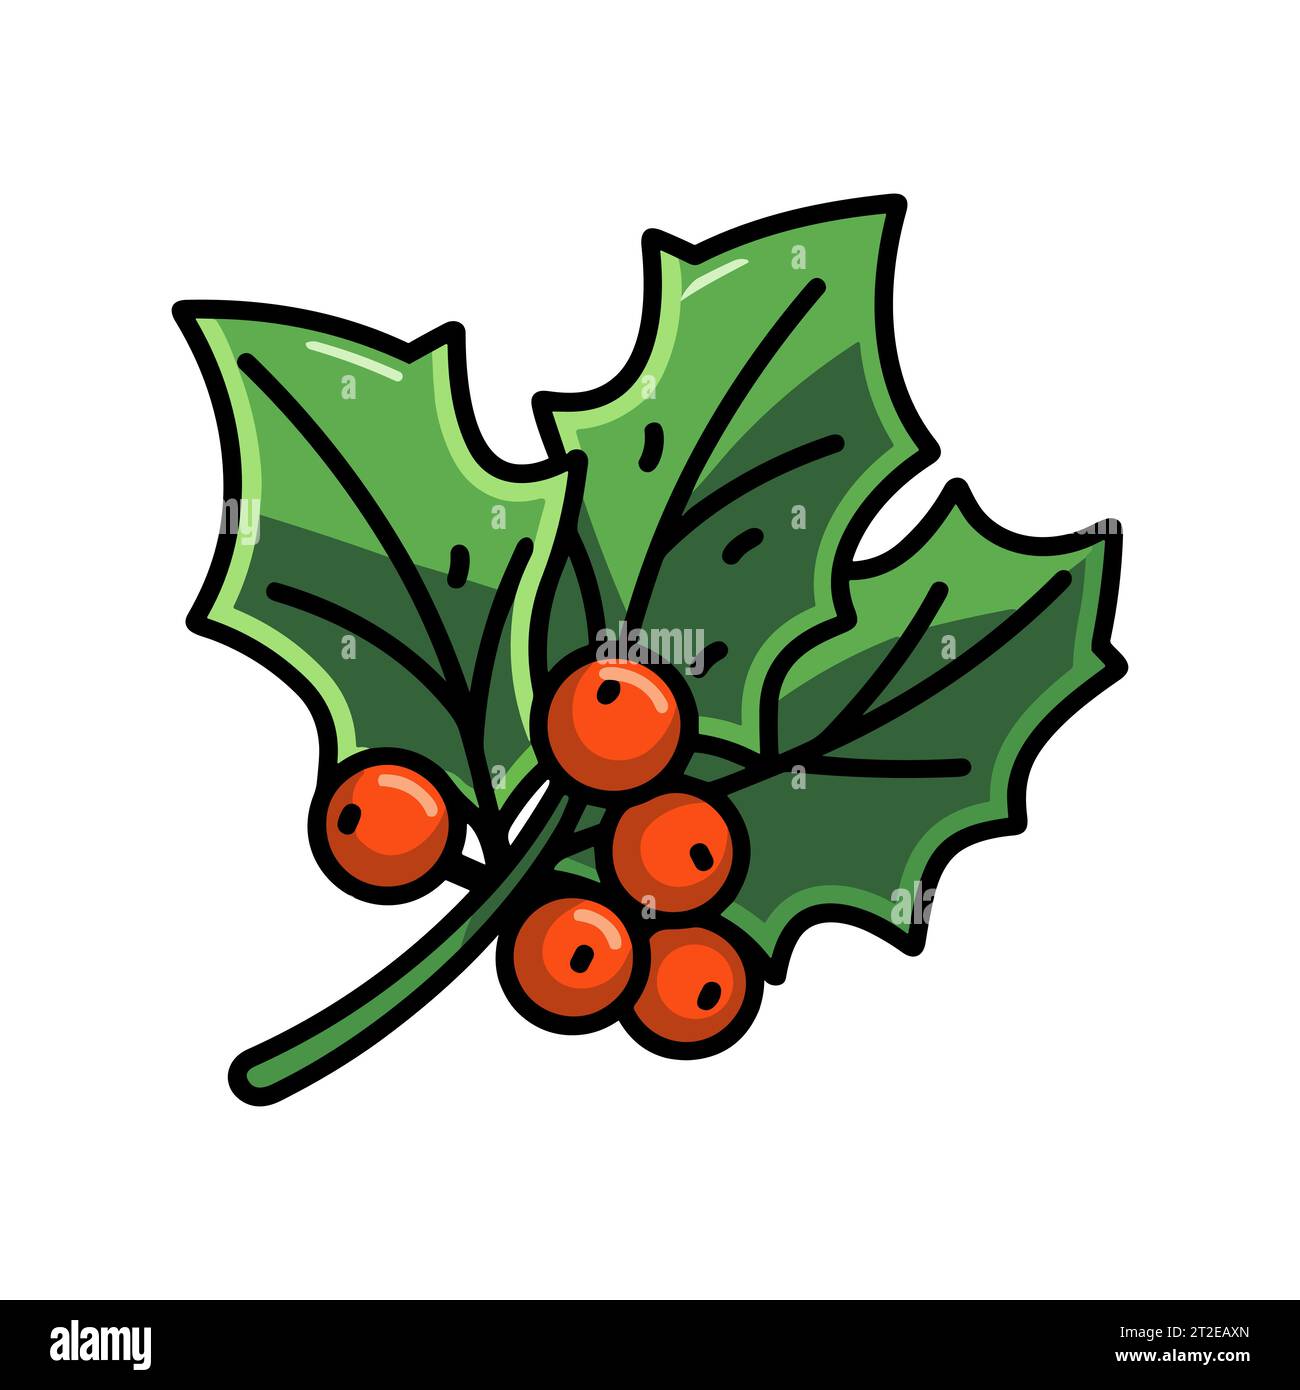 Christmas Holly Berry Leaves Vector Illustration Stock Vector